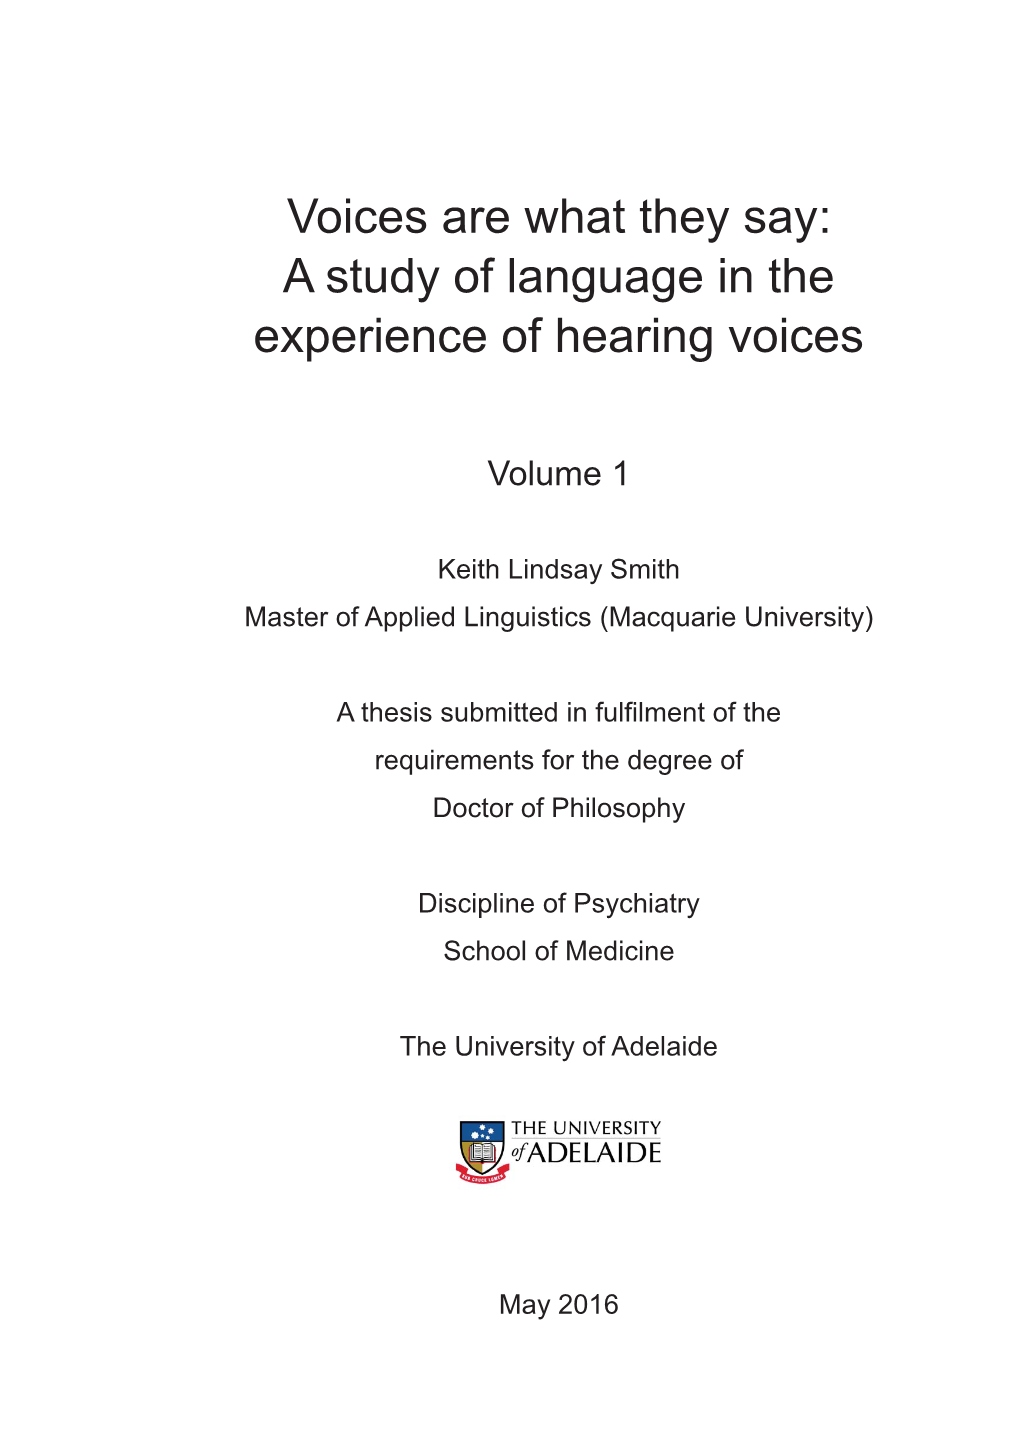 A Study of Language in the Experience of Hearing Voices